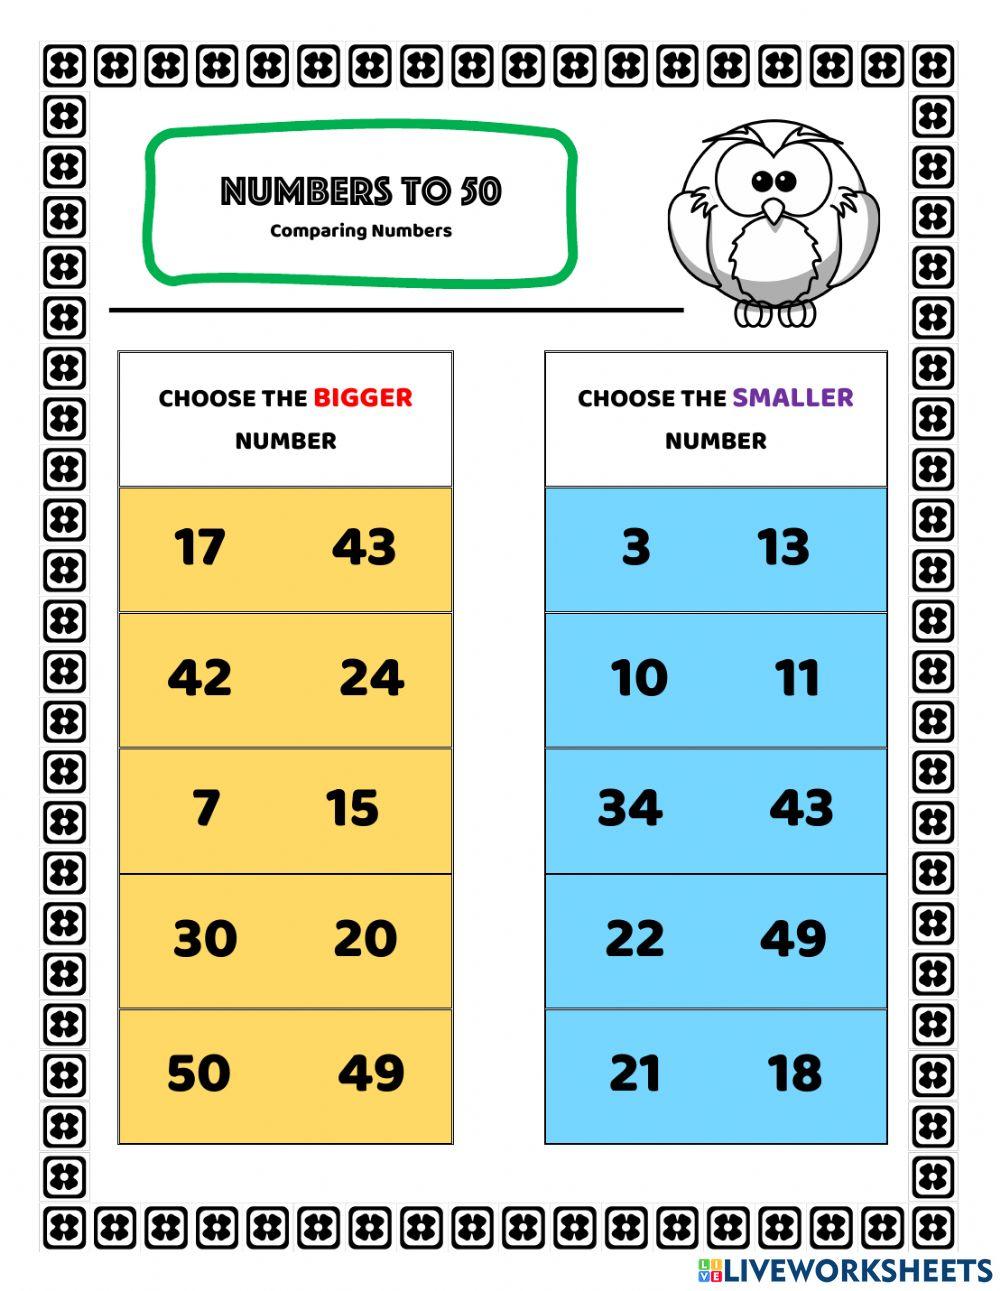 Comparing numbers to 50